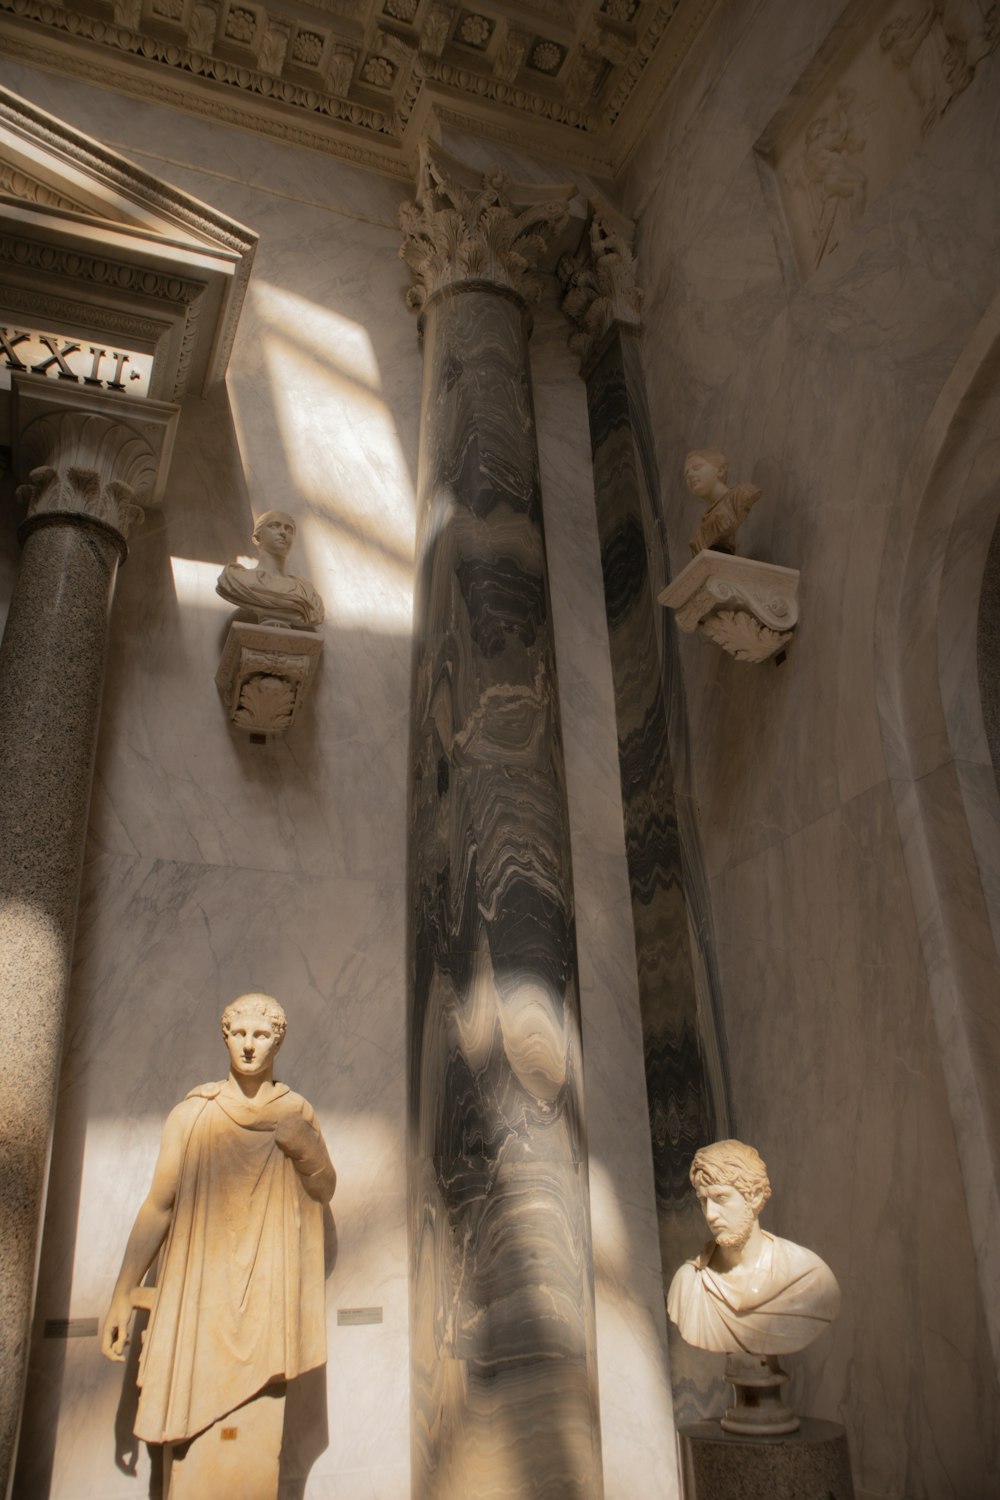 statues in a room